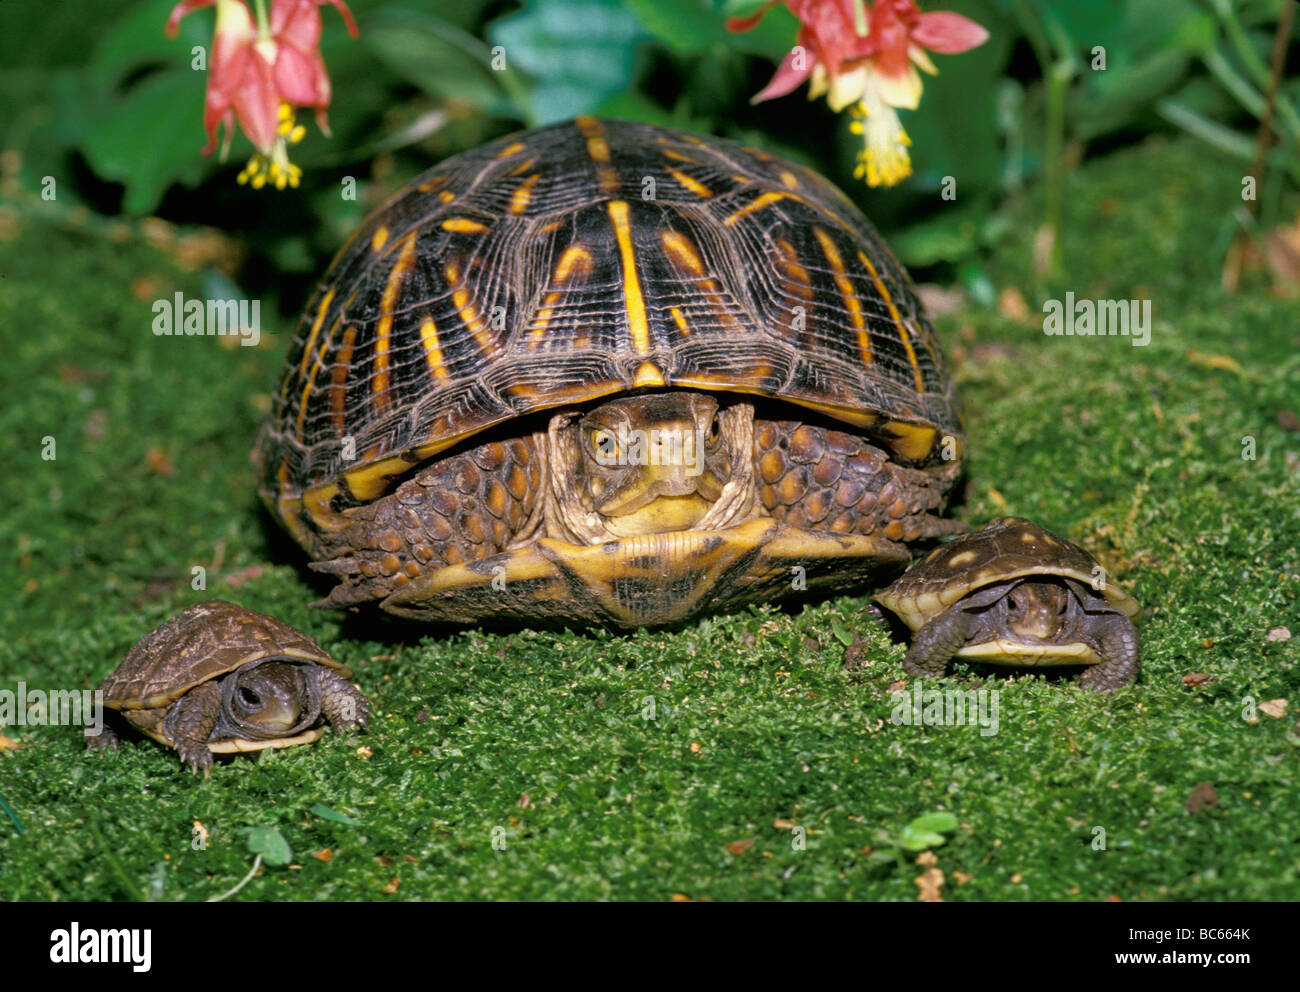 Family Portrait: Mother ornate box turtle and two babies pose under Columbine flowers in moss Stock Photo